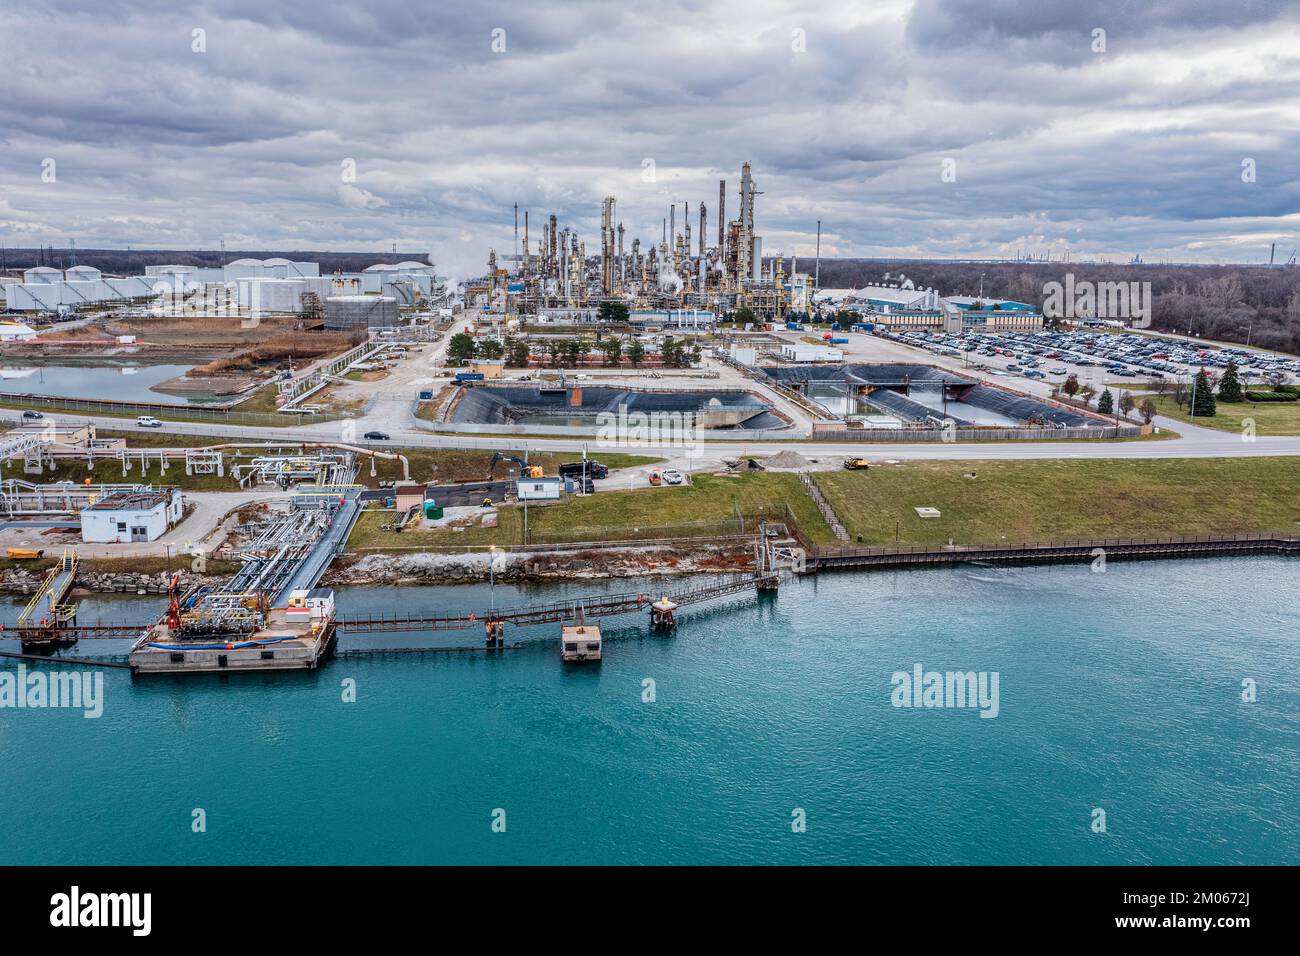 Suncor Sarnia Refinery produces petrol gasoline, kerosene, jet, and diesel fuels in Canada along the freshwater St. Clair River / US Border. Stock Photo